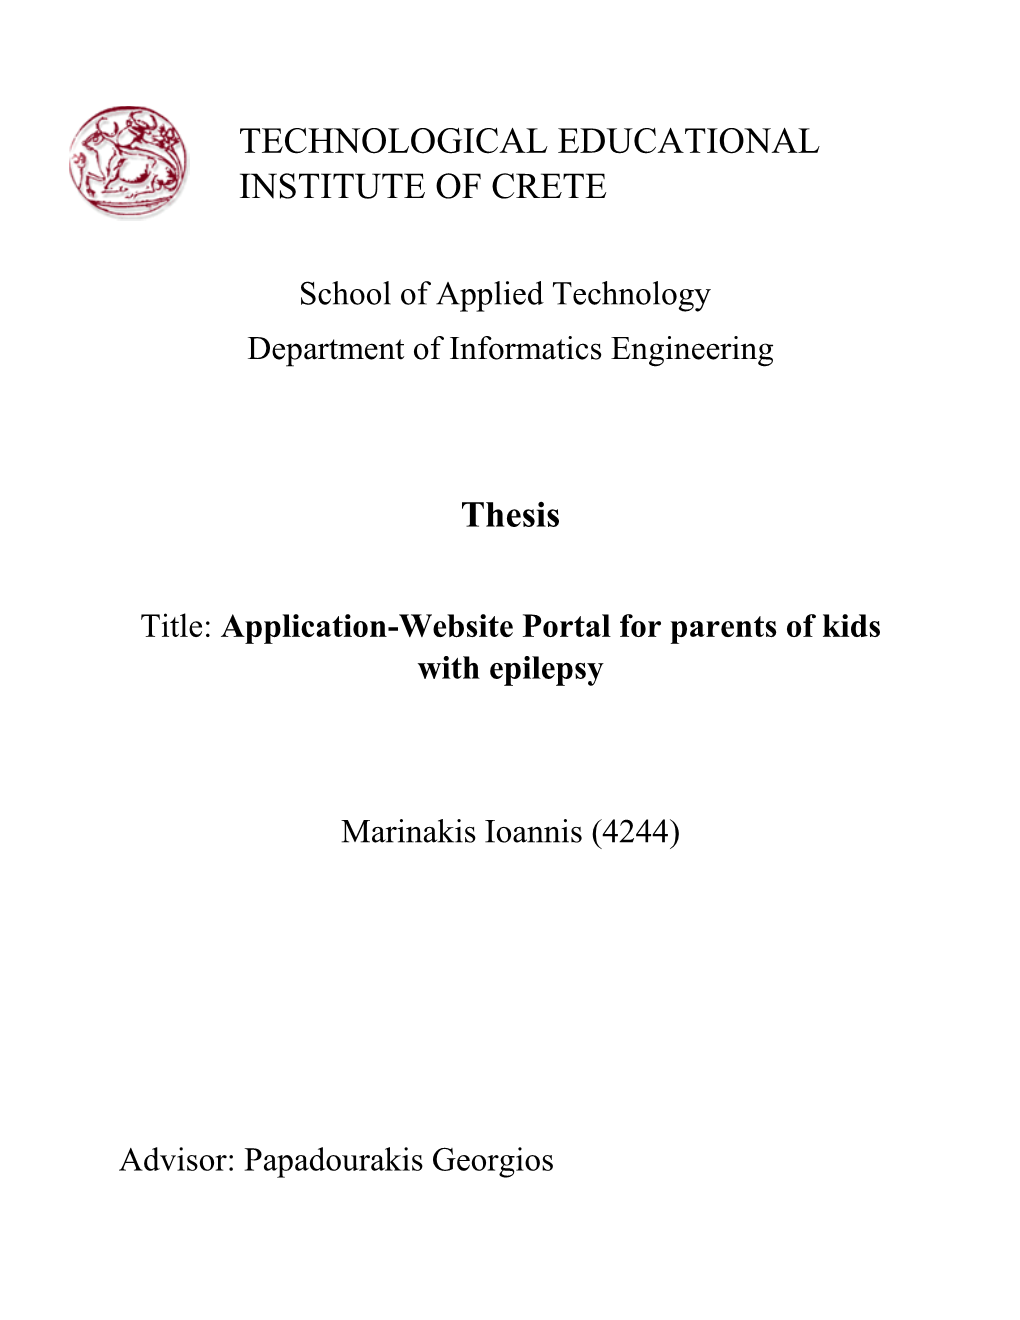 TECHNOLOGICAL EDUCATIONAL INSTITUTE of CRETE Thesis